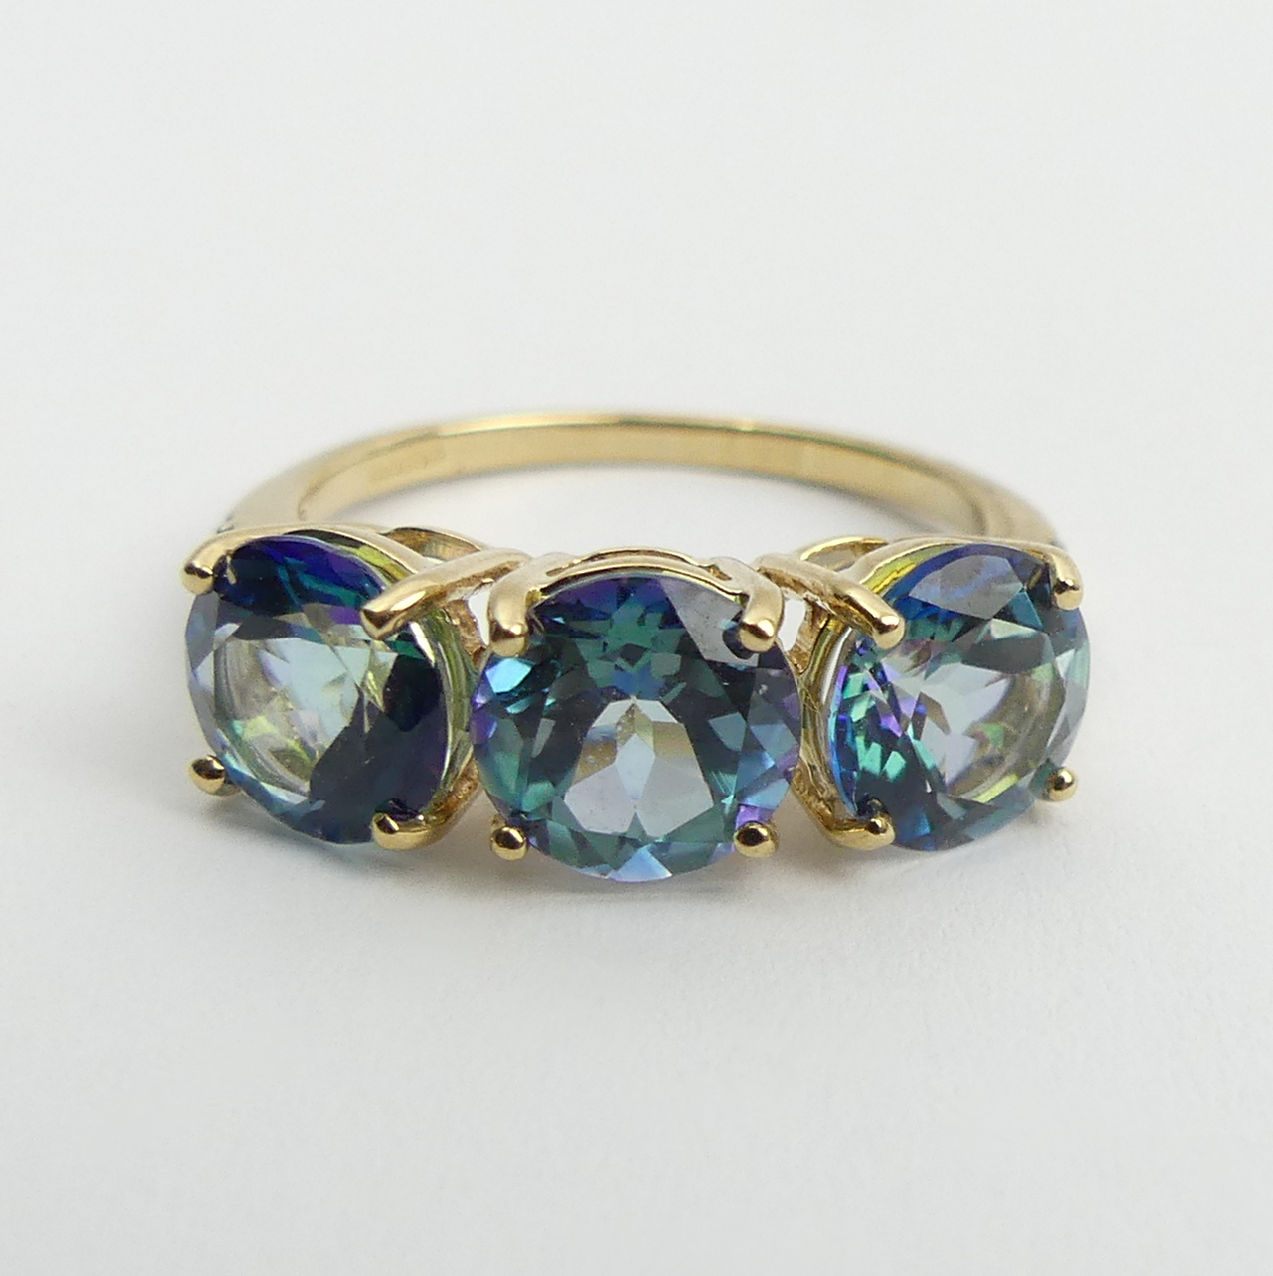 9ct gold mystic topaz and diamond ring, 3.2 grams, 7mm, size N. UK Postage £12. - Image 2 of 7